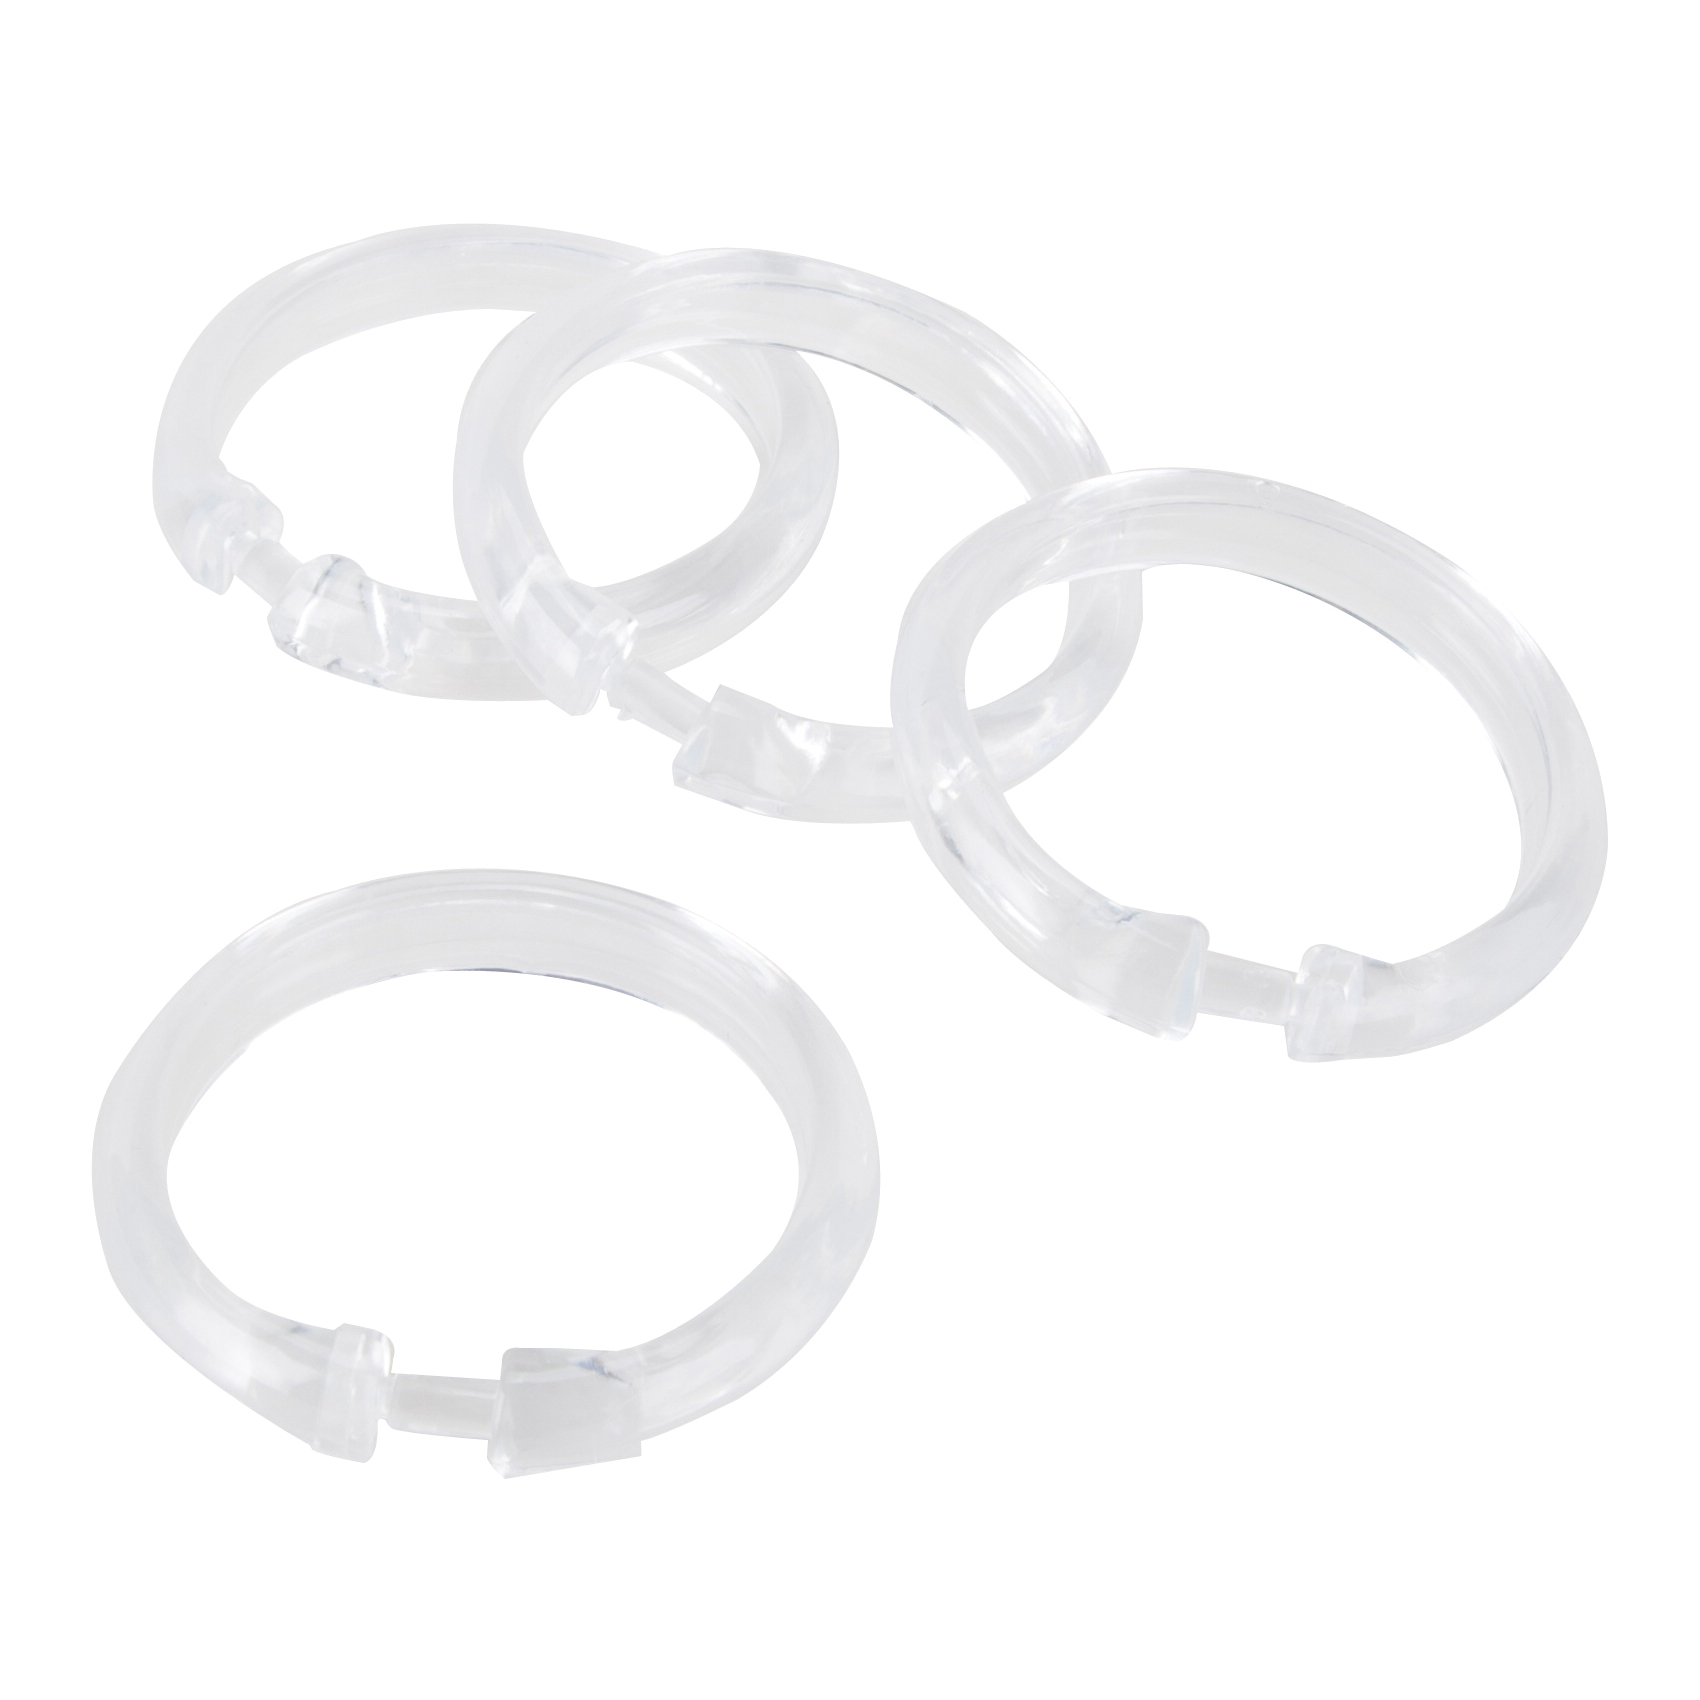 Simple Spaces SD-ORING-C3L Shower Curtain Ring, Plastic, Clear, 1 cm W, 2-1/2 in H - 1